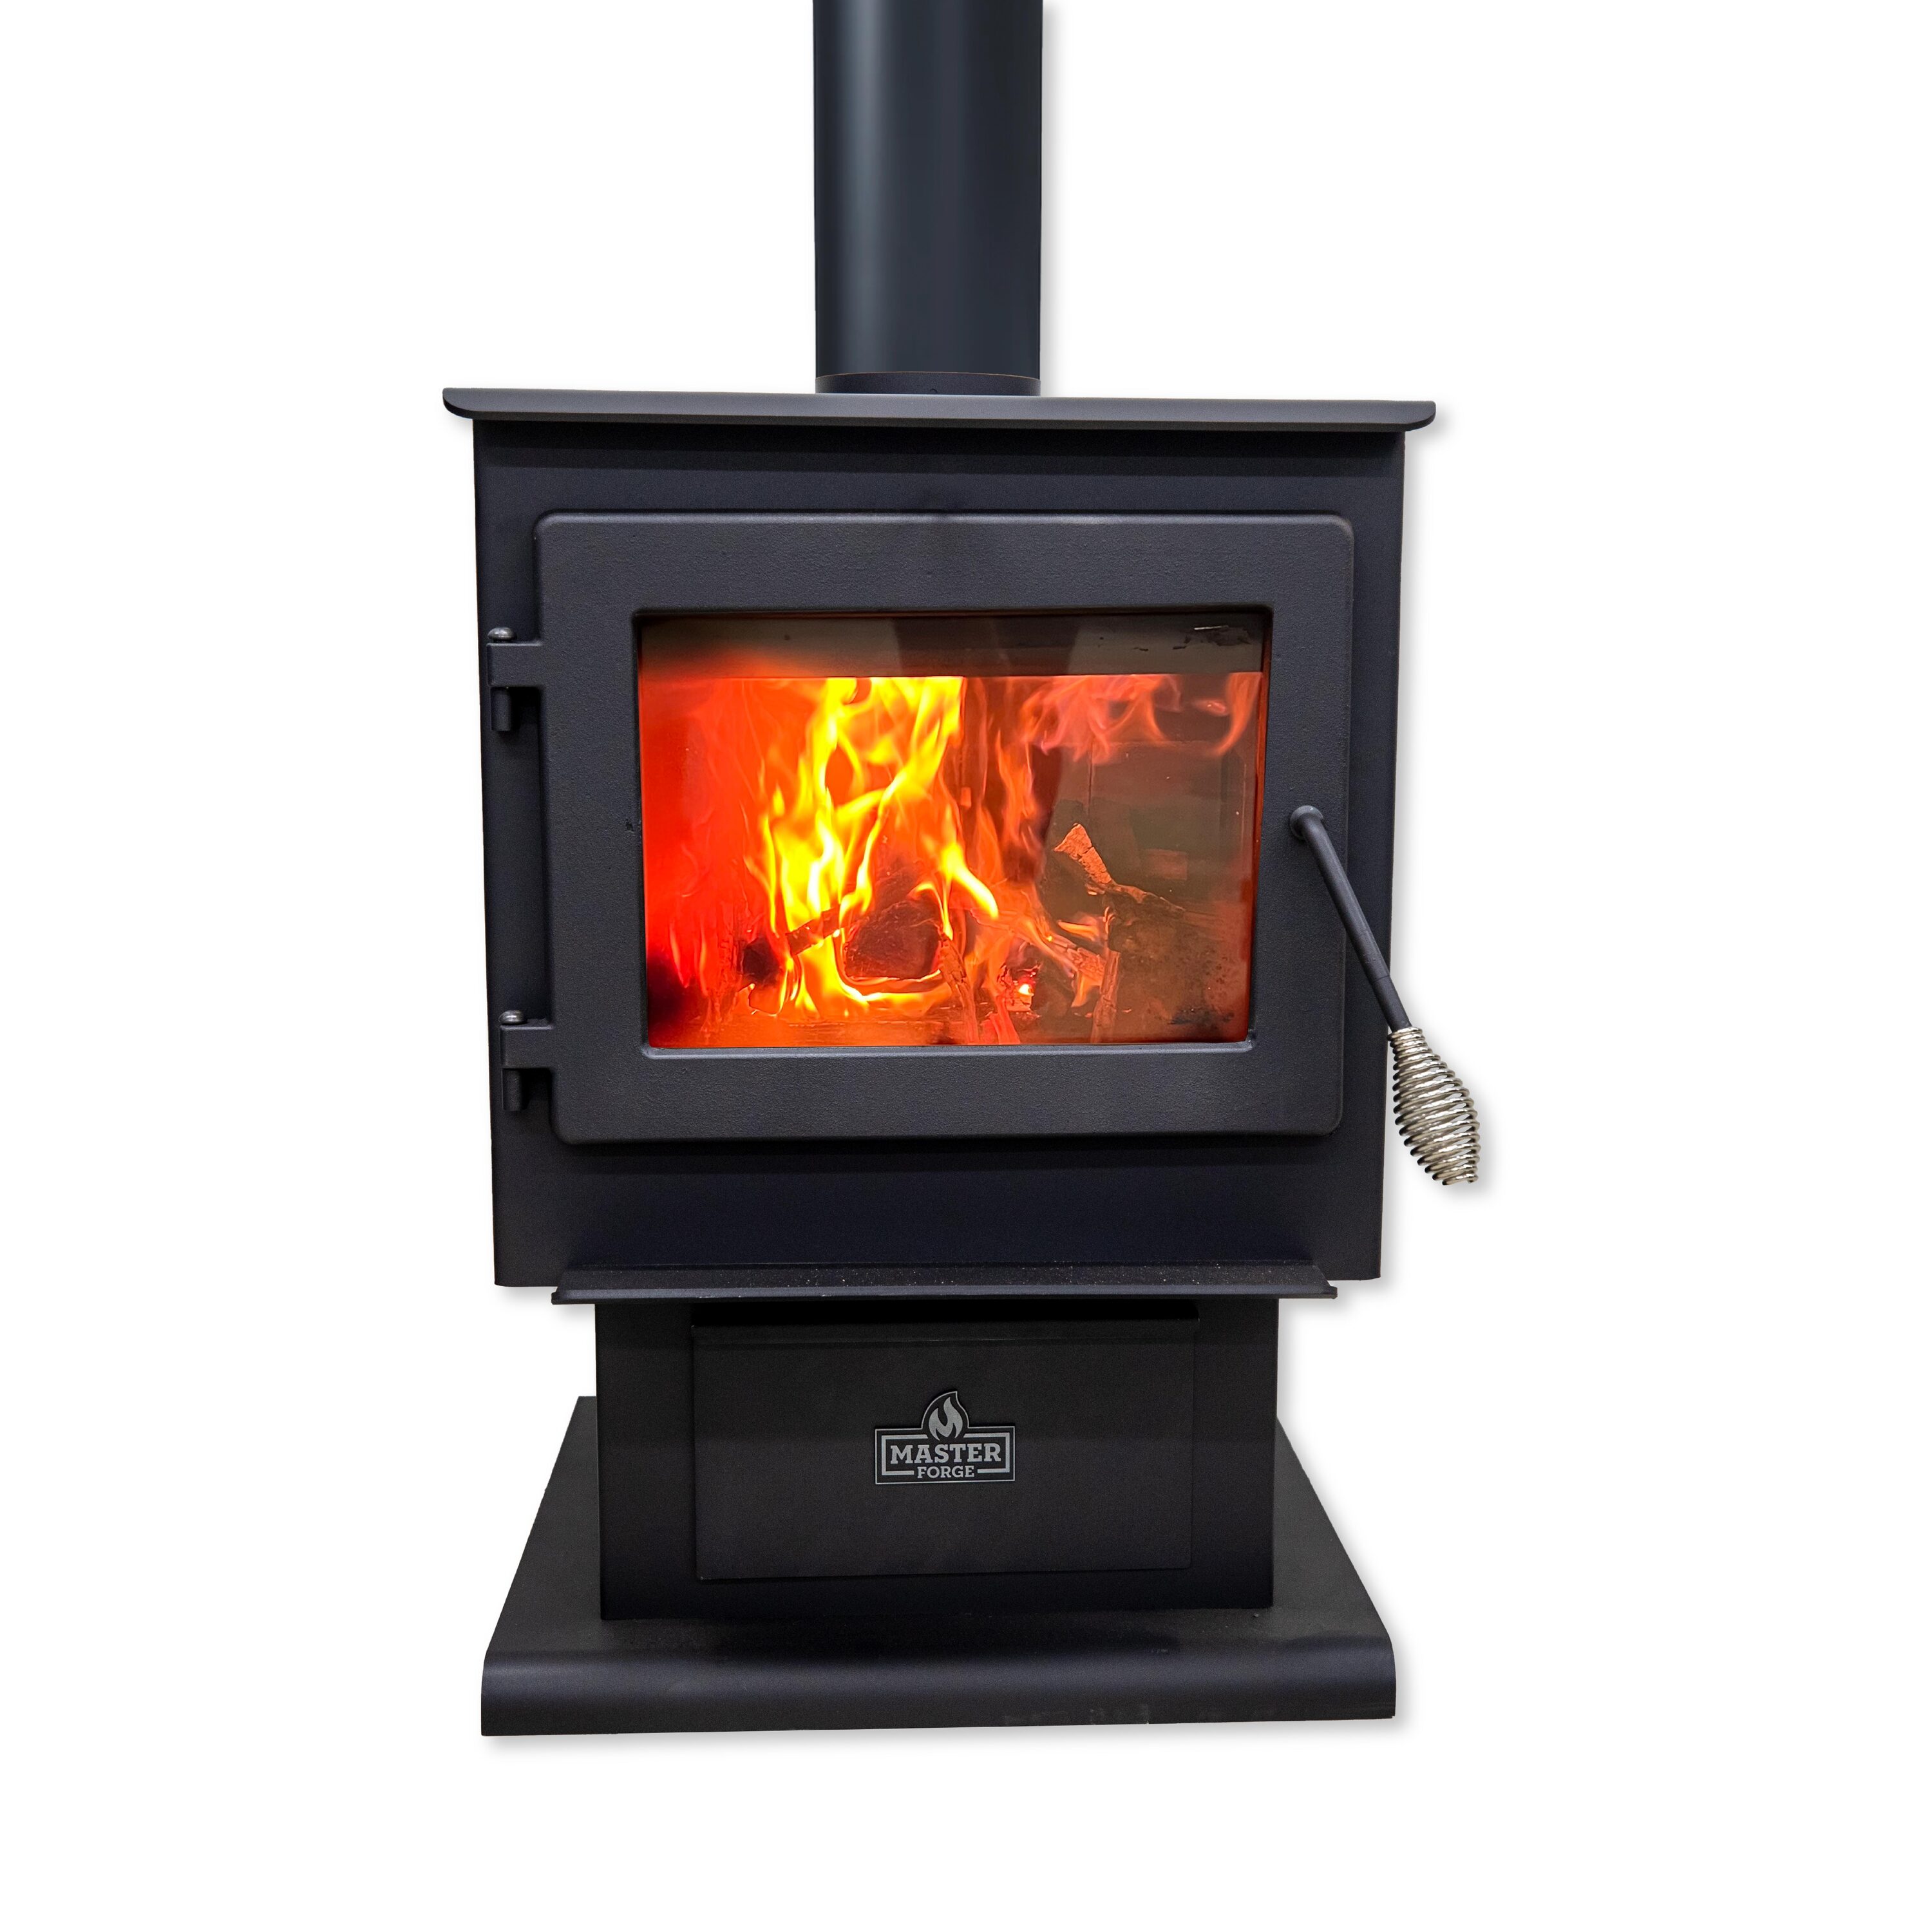 Titanium Stove Pipe Wood Stove Chimney, advantages, and notices